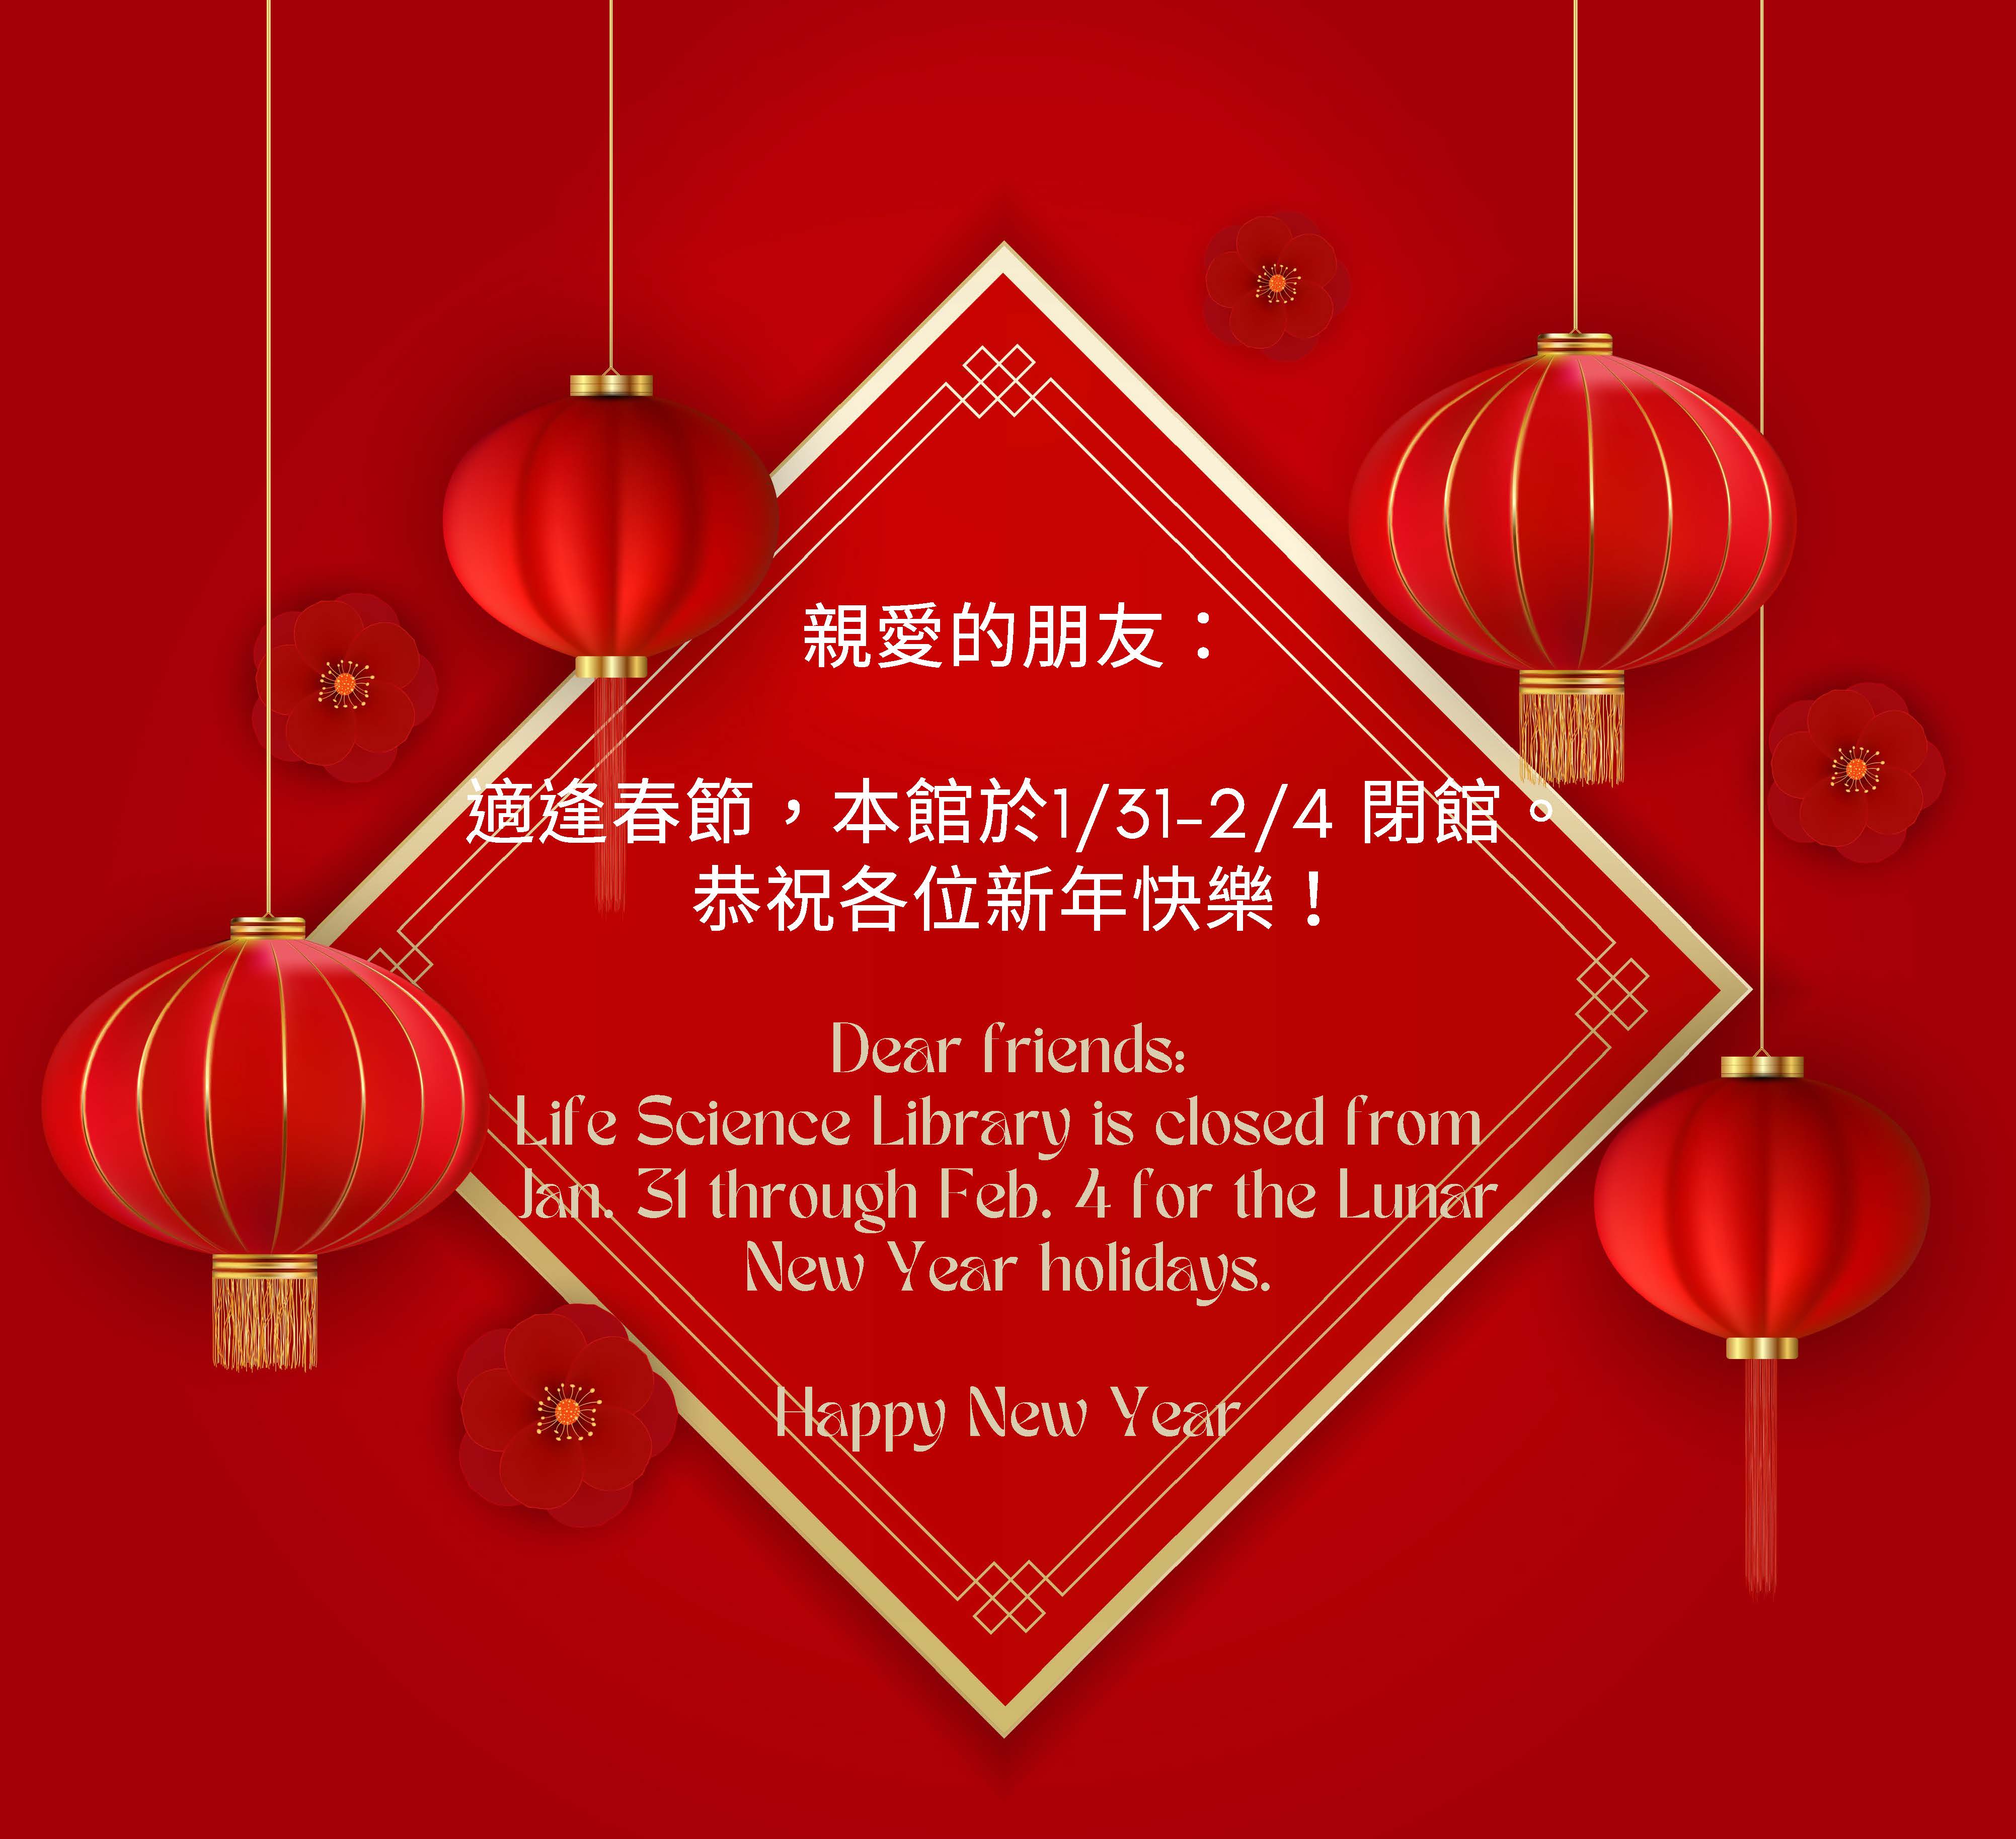 Chinese New Year Holiday Notice